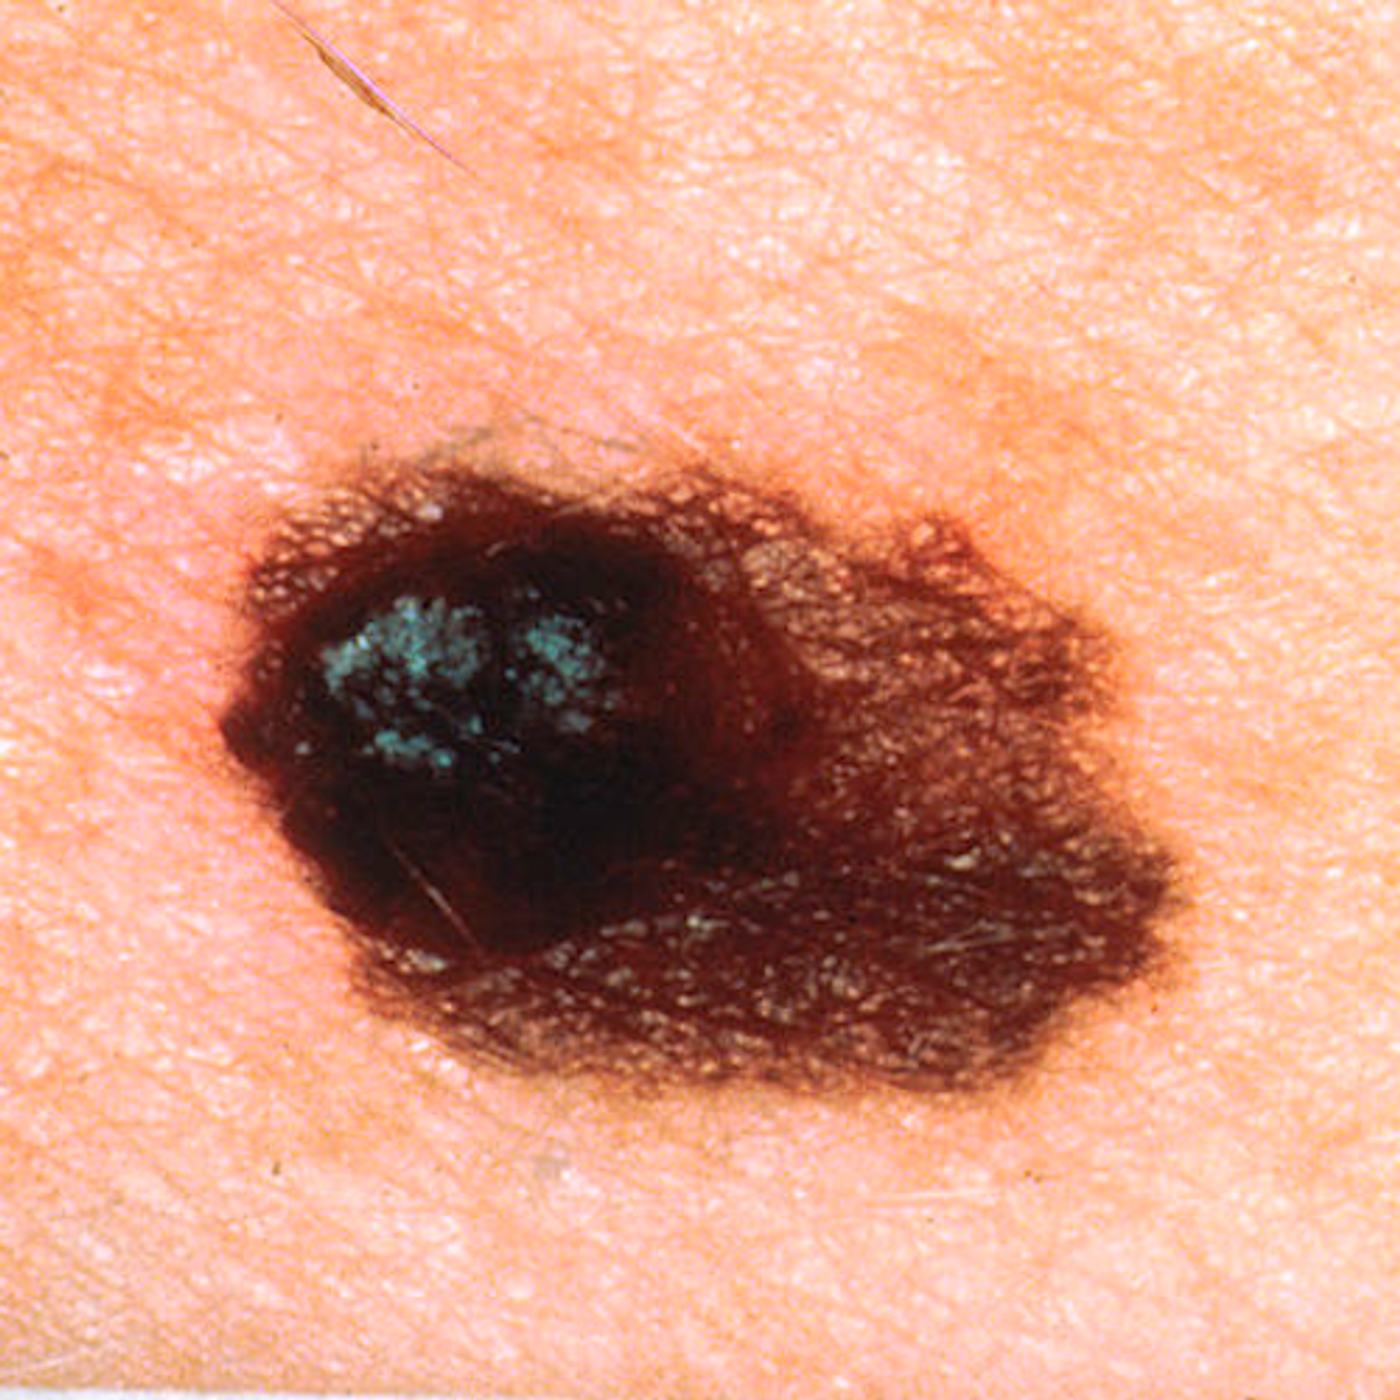 Asymmetrical melanoma, the left side of the lesion is much thicker than the right side. / Credit: Wikimedia Commons/Skin Cancer Foundation